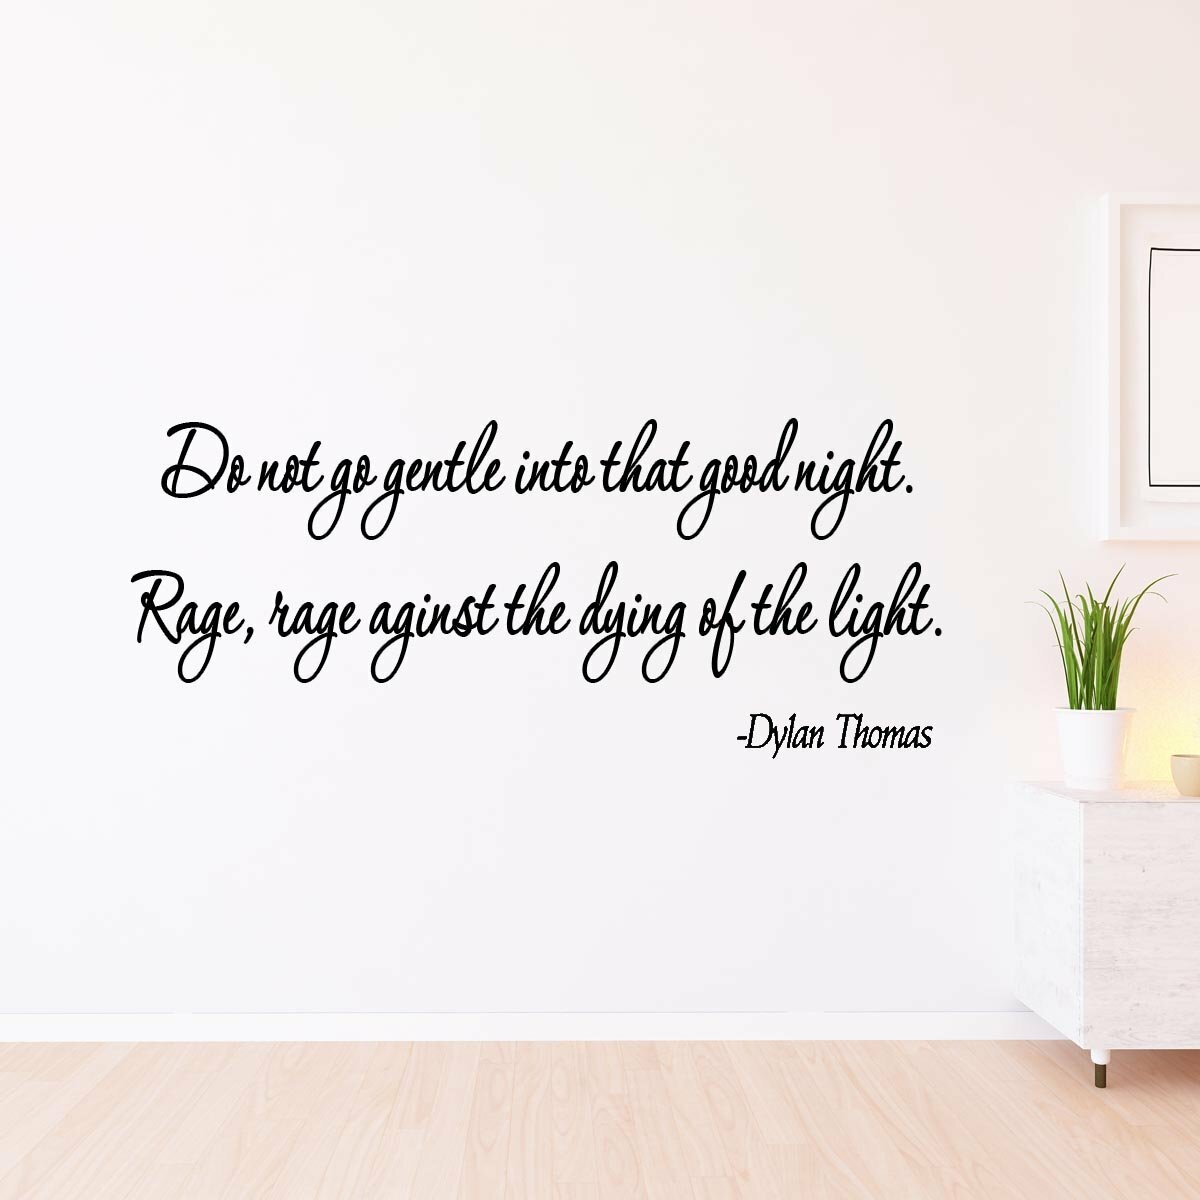 Winston Porter Do Not Go Gentle Into That Good Night Dylan Thomas Poem Wall Decal Wayfair